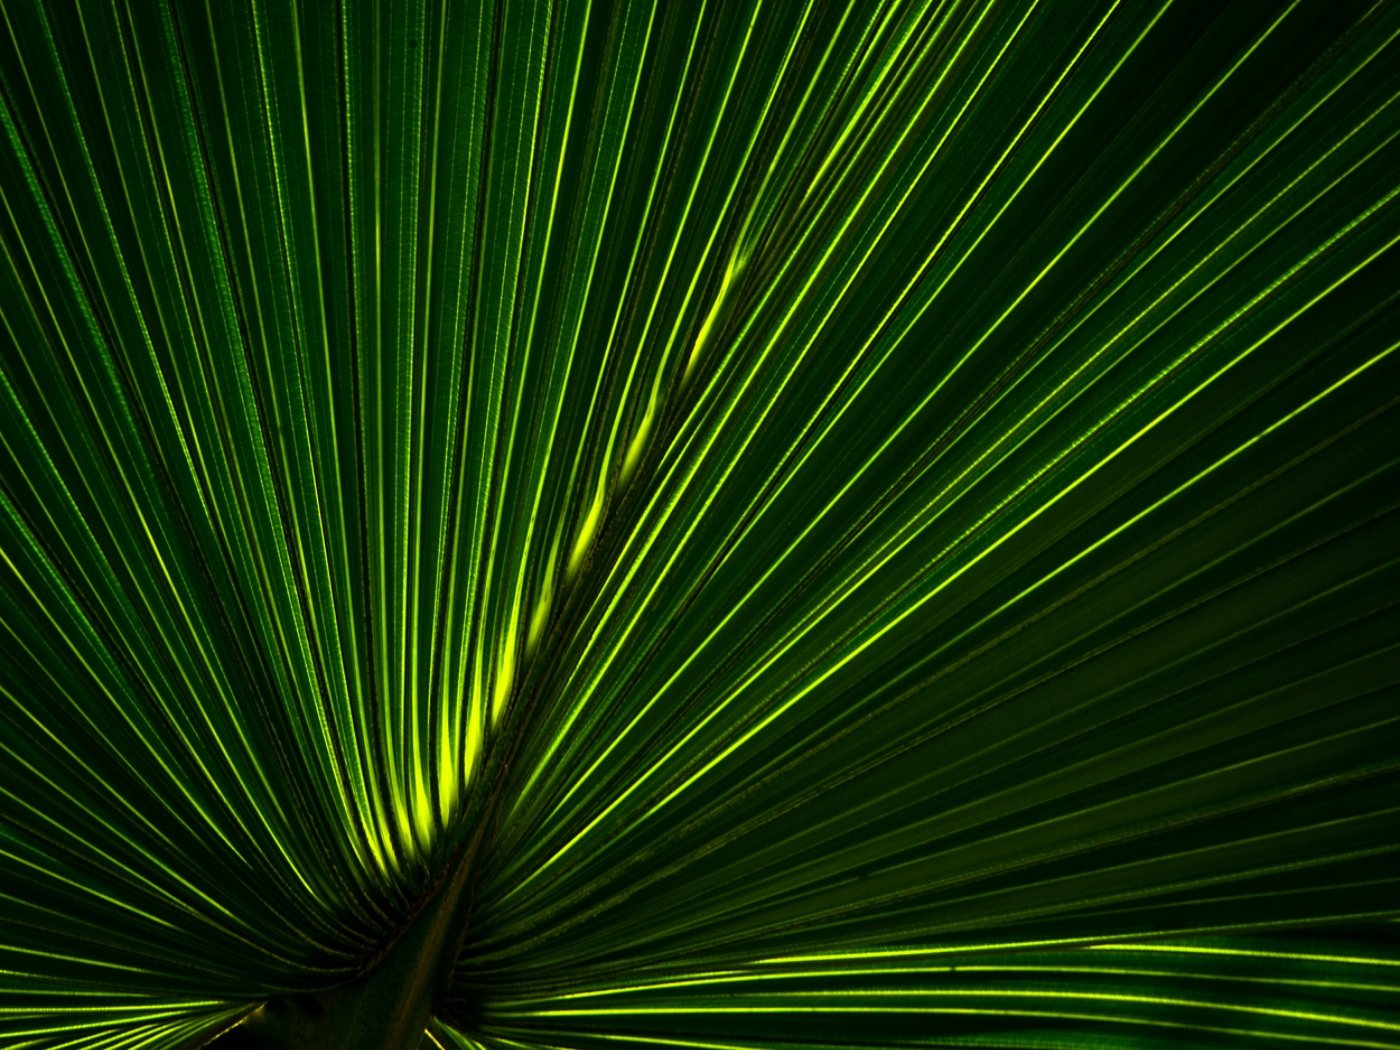 A close-up image of a yellow-green textured palm leaf.